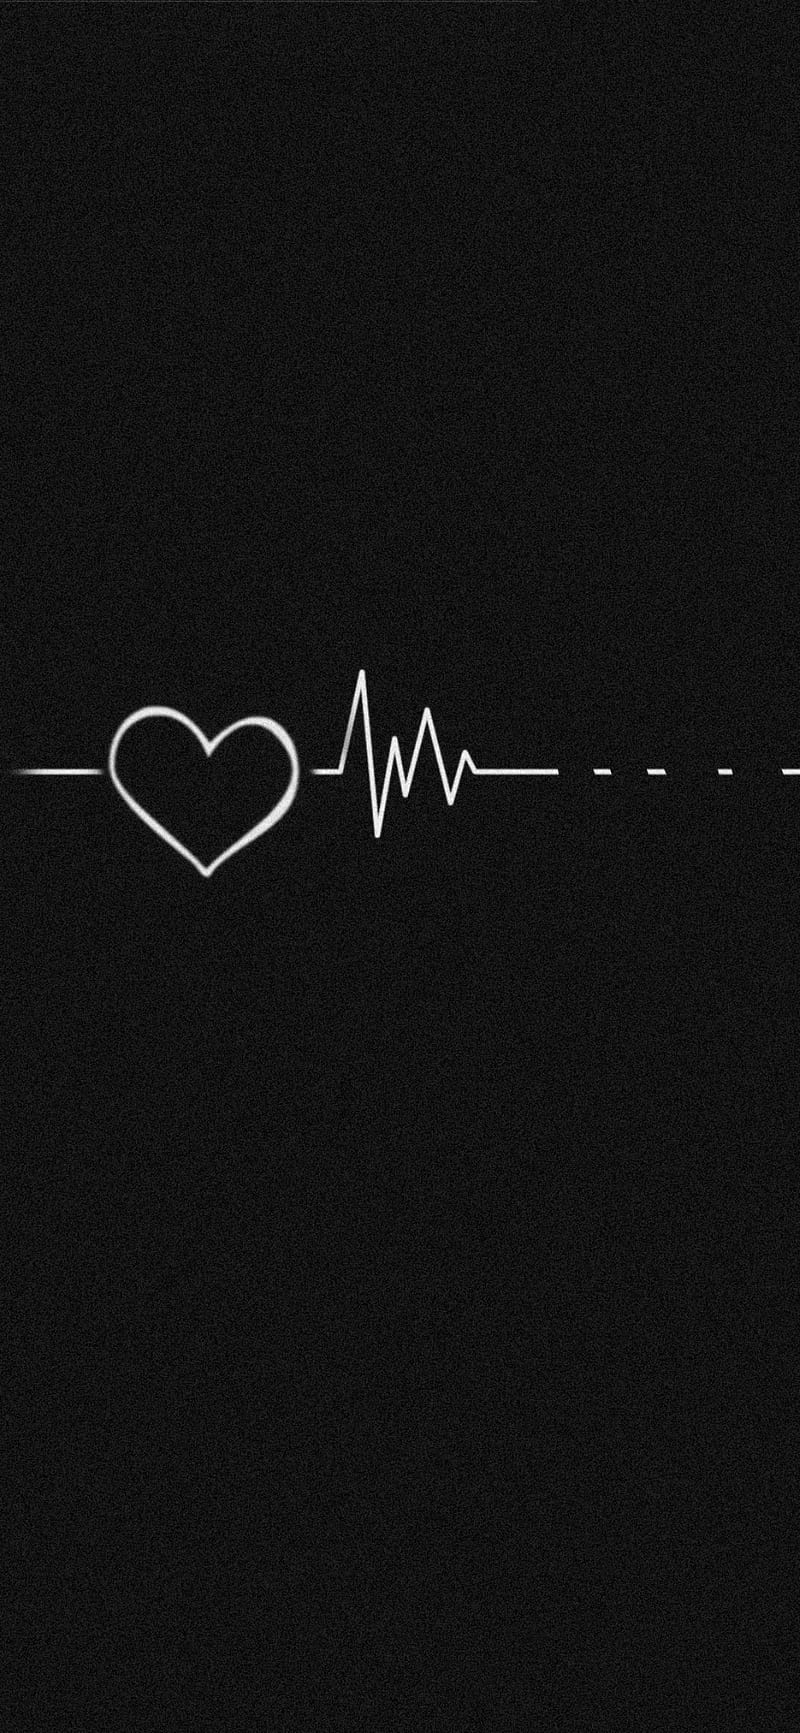 A heart and a heartbeat line on a black background - Black heart